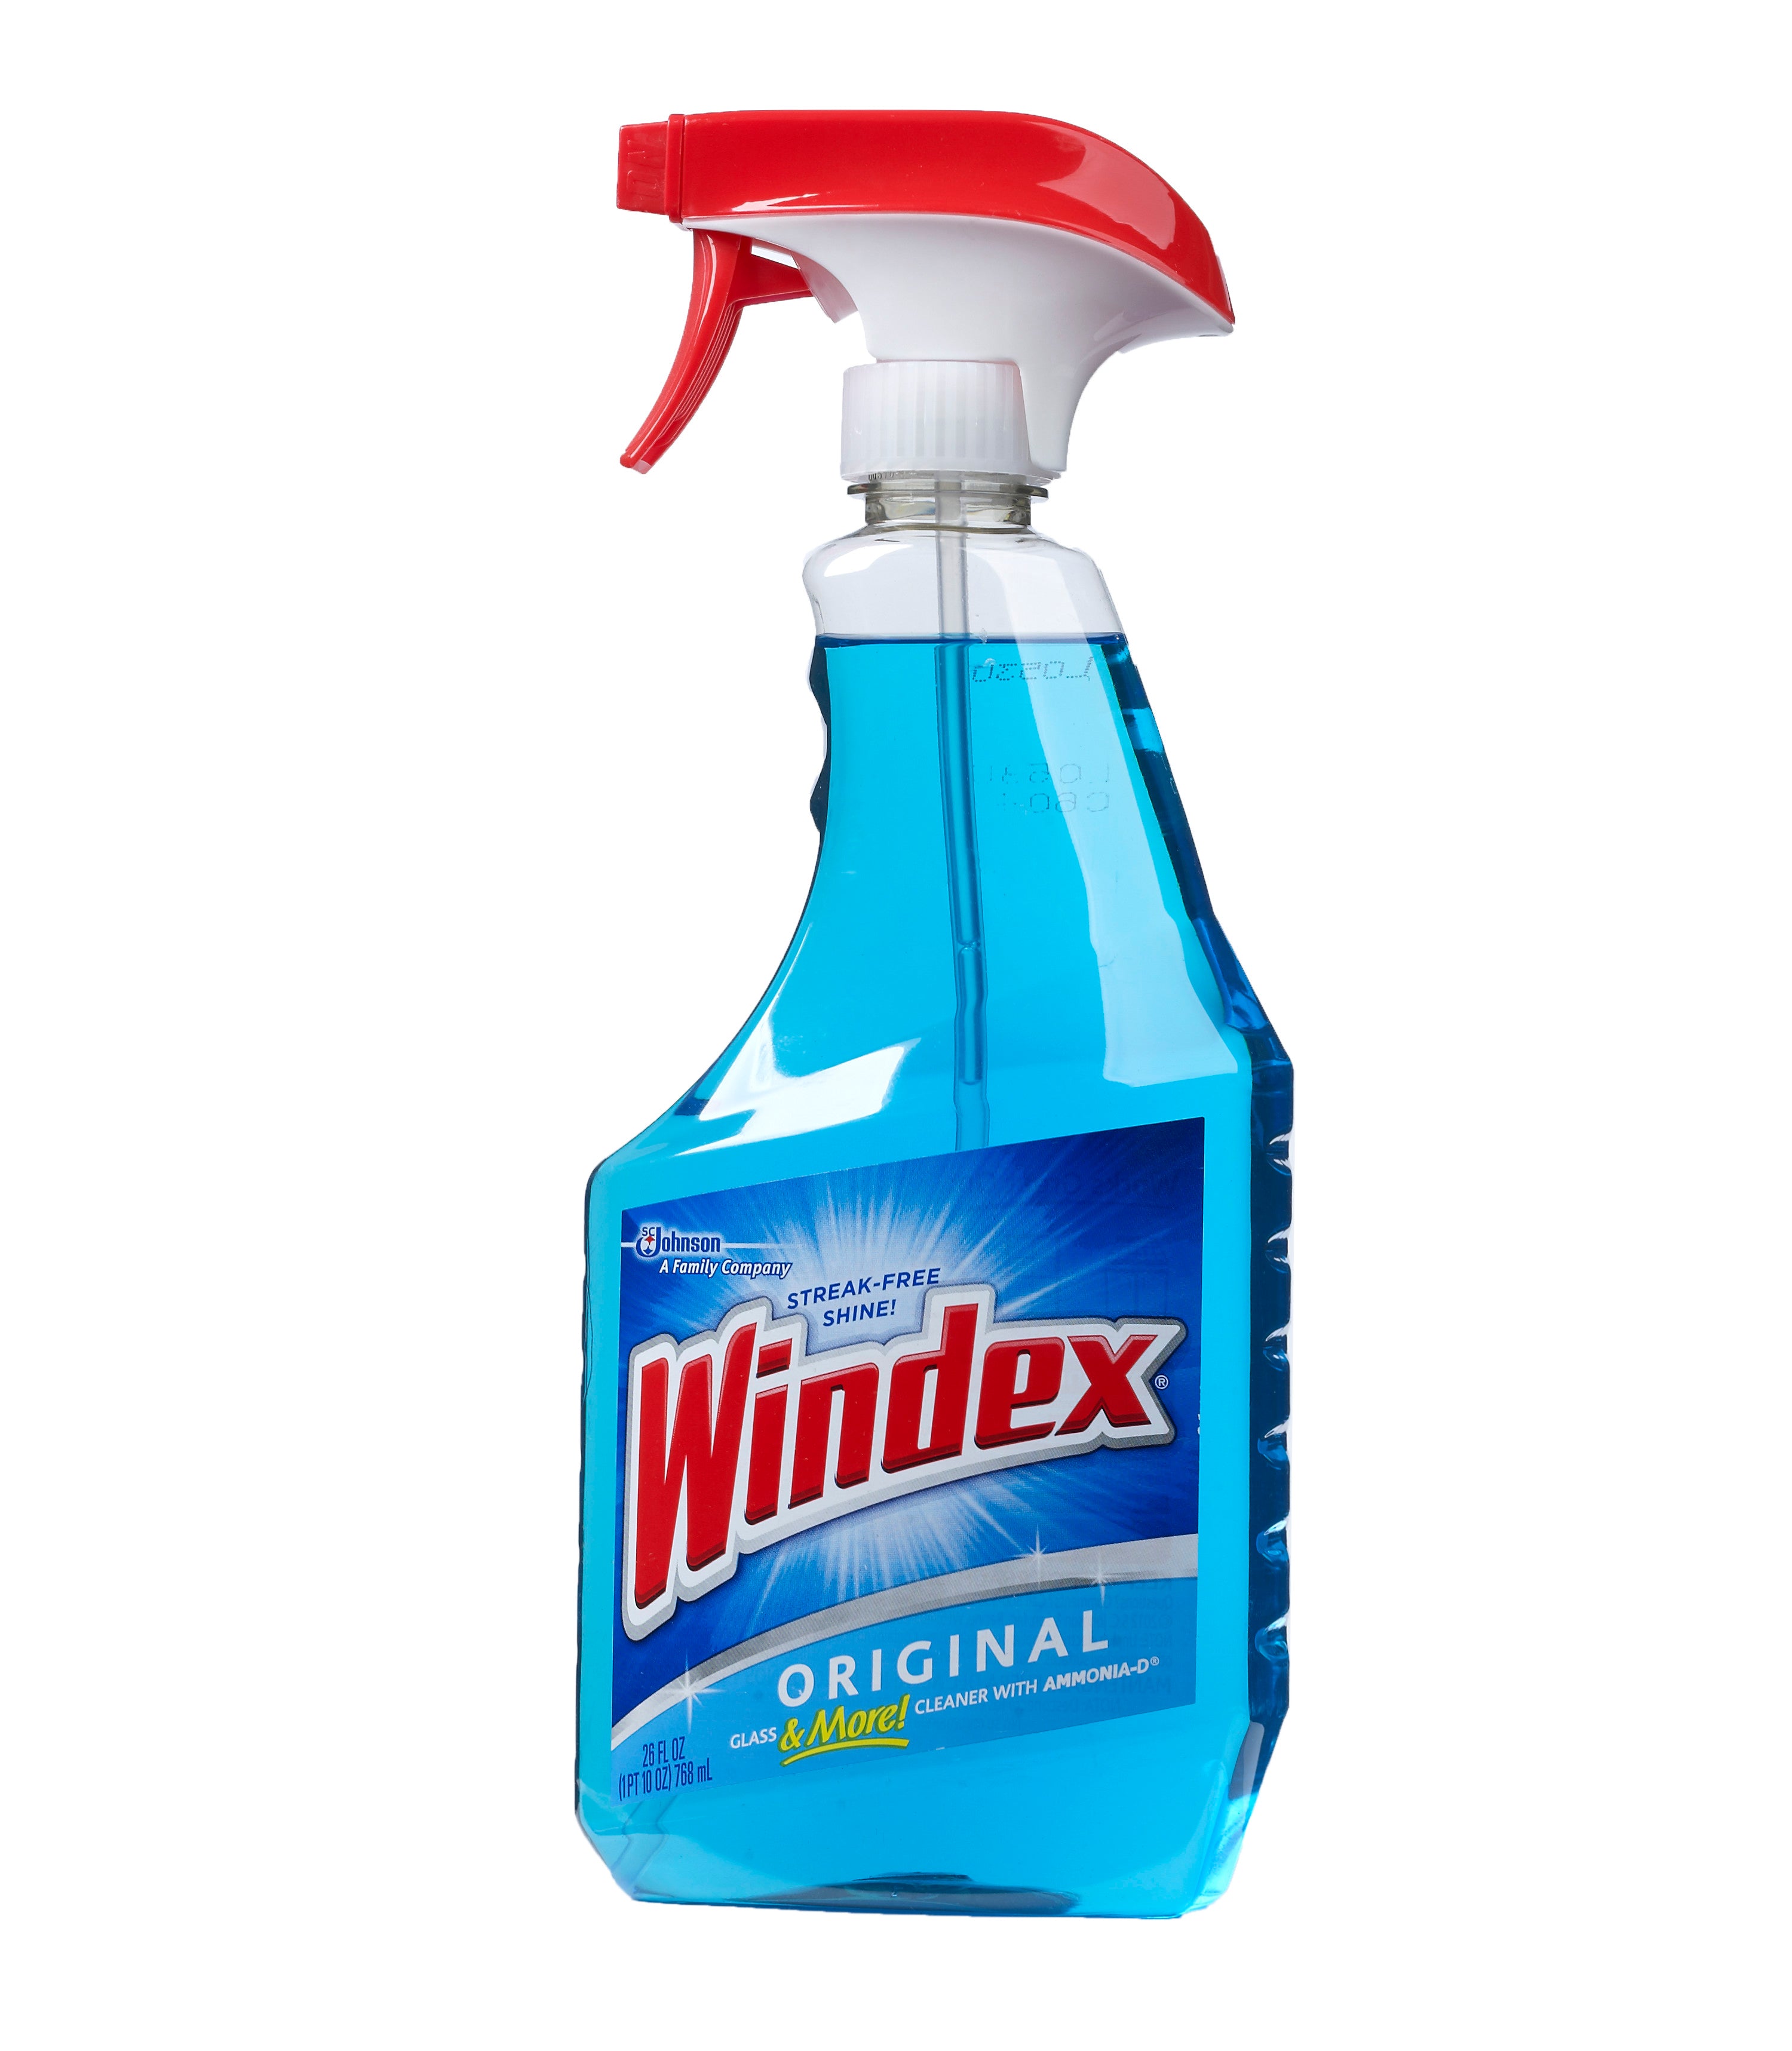  Windex 70255 Multi-Surface Glass Cleaner, 26 Oz : Health &  Household